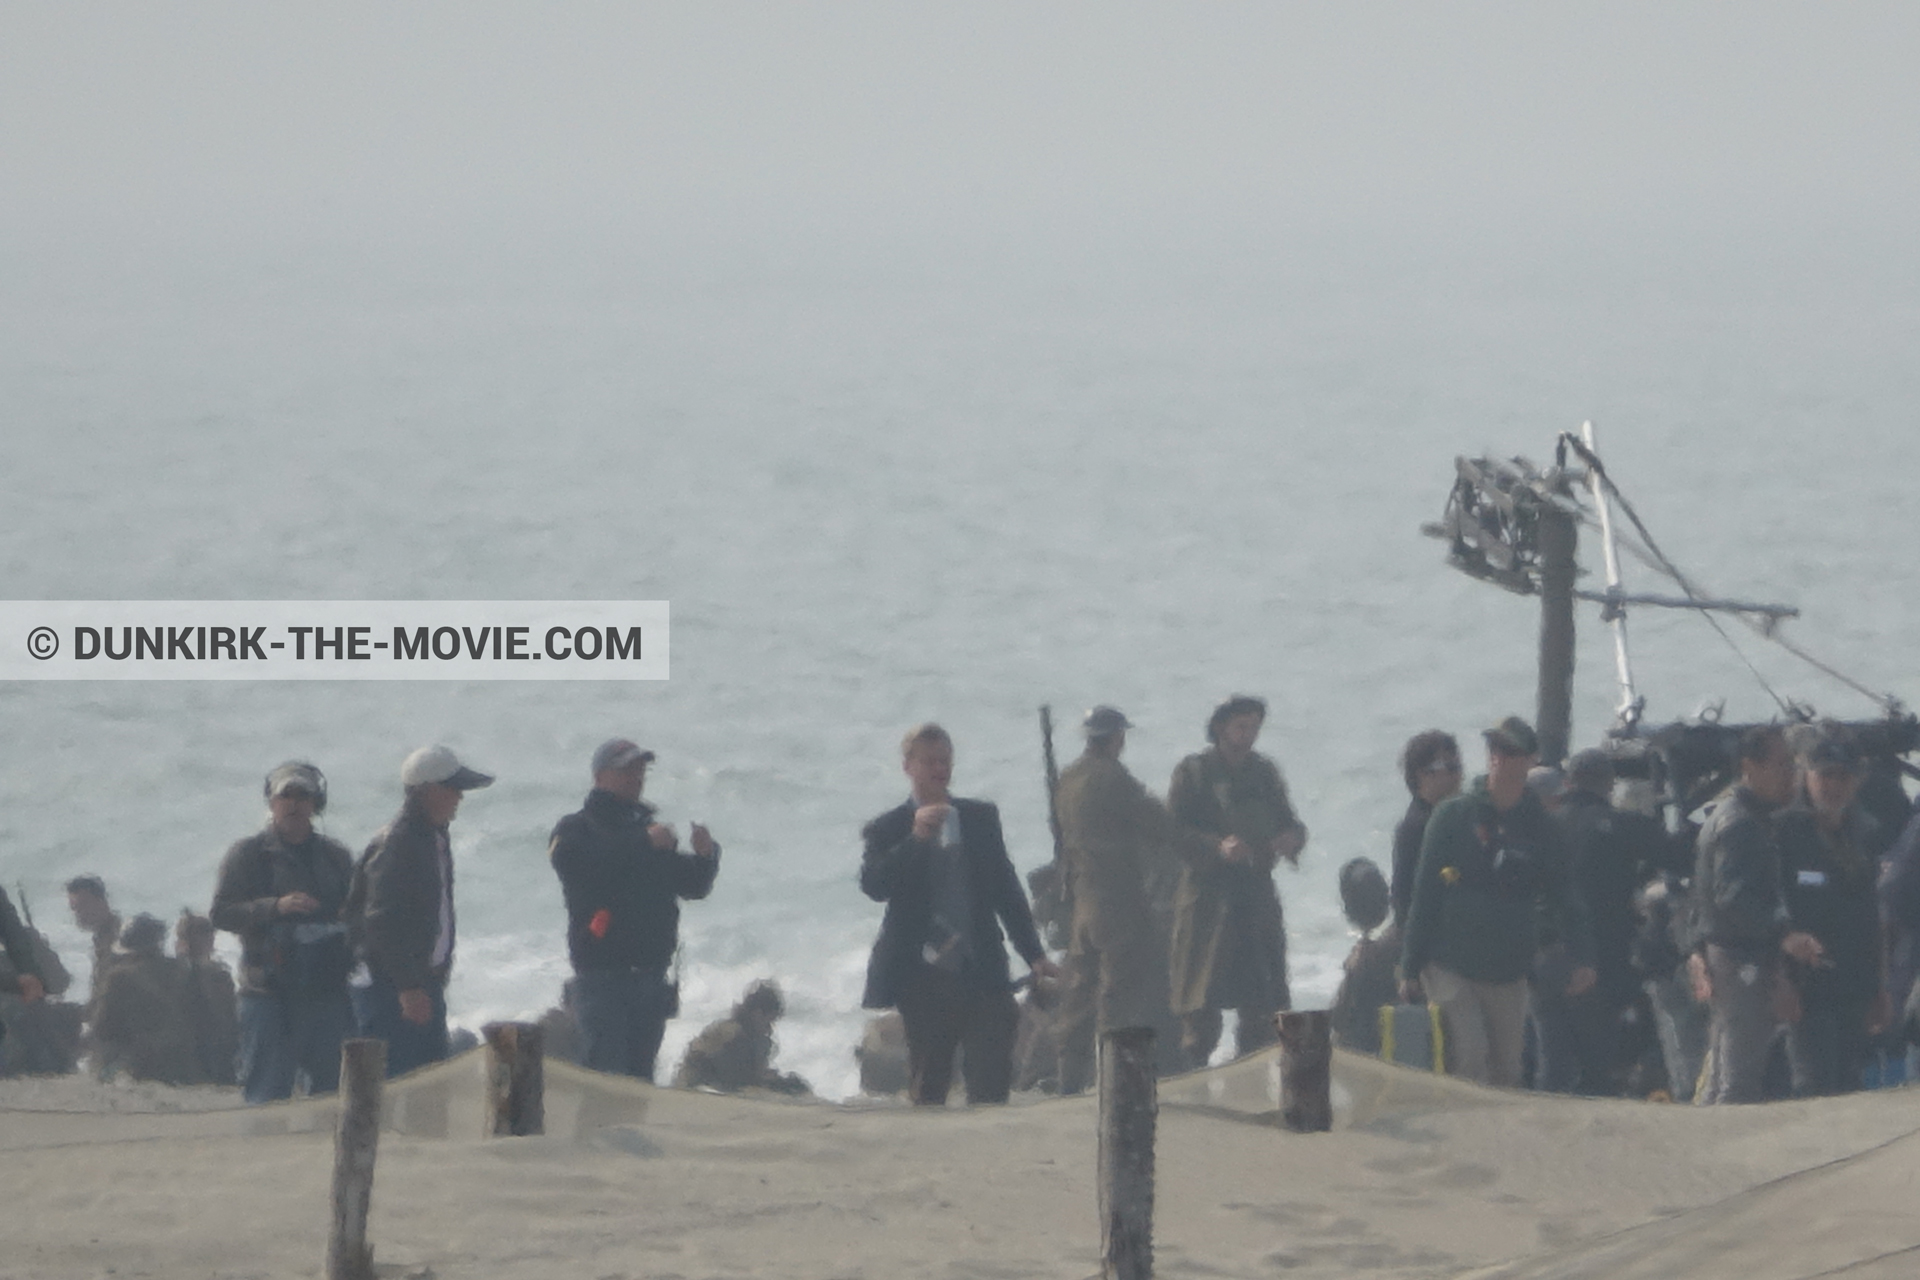 Picture with supernumeraries, Christopher Nolan, beach, technical team,  from behind the scene of the Dunkirk movie by Nolan